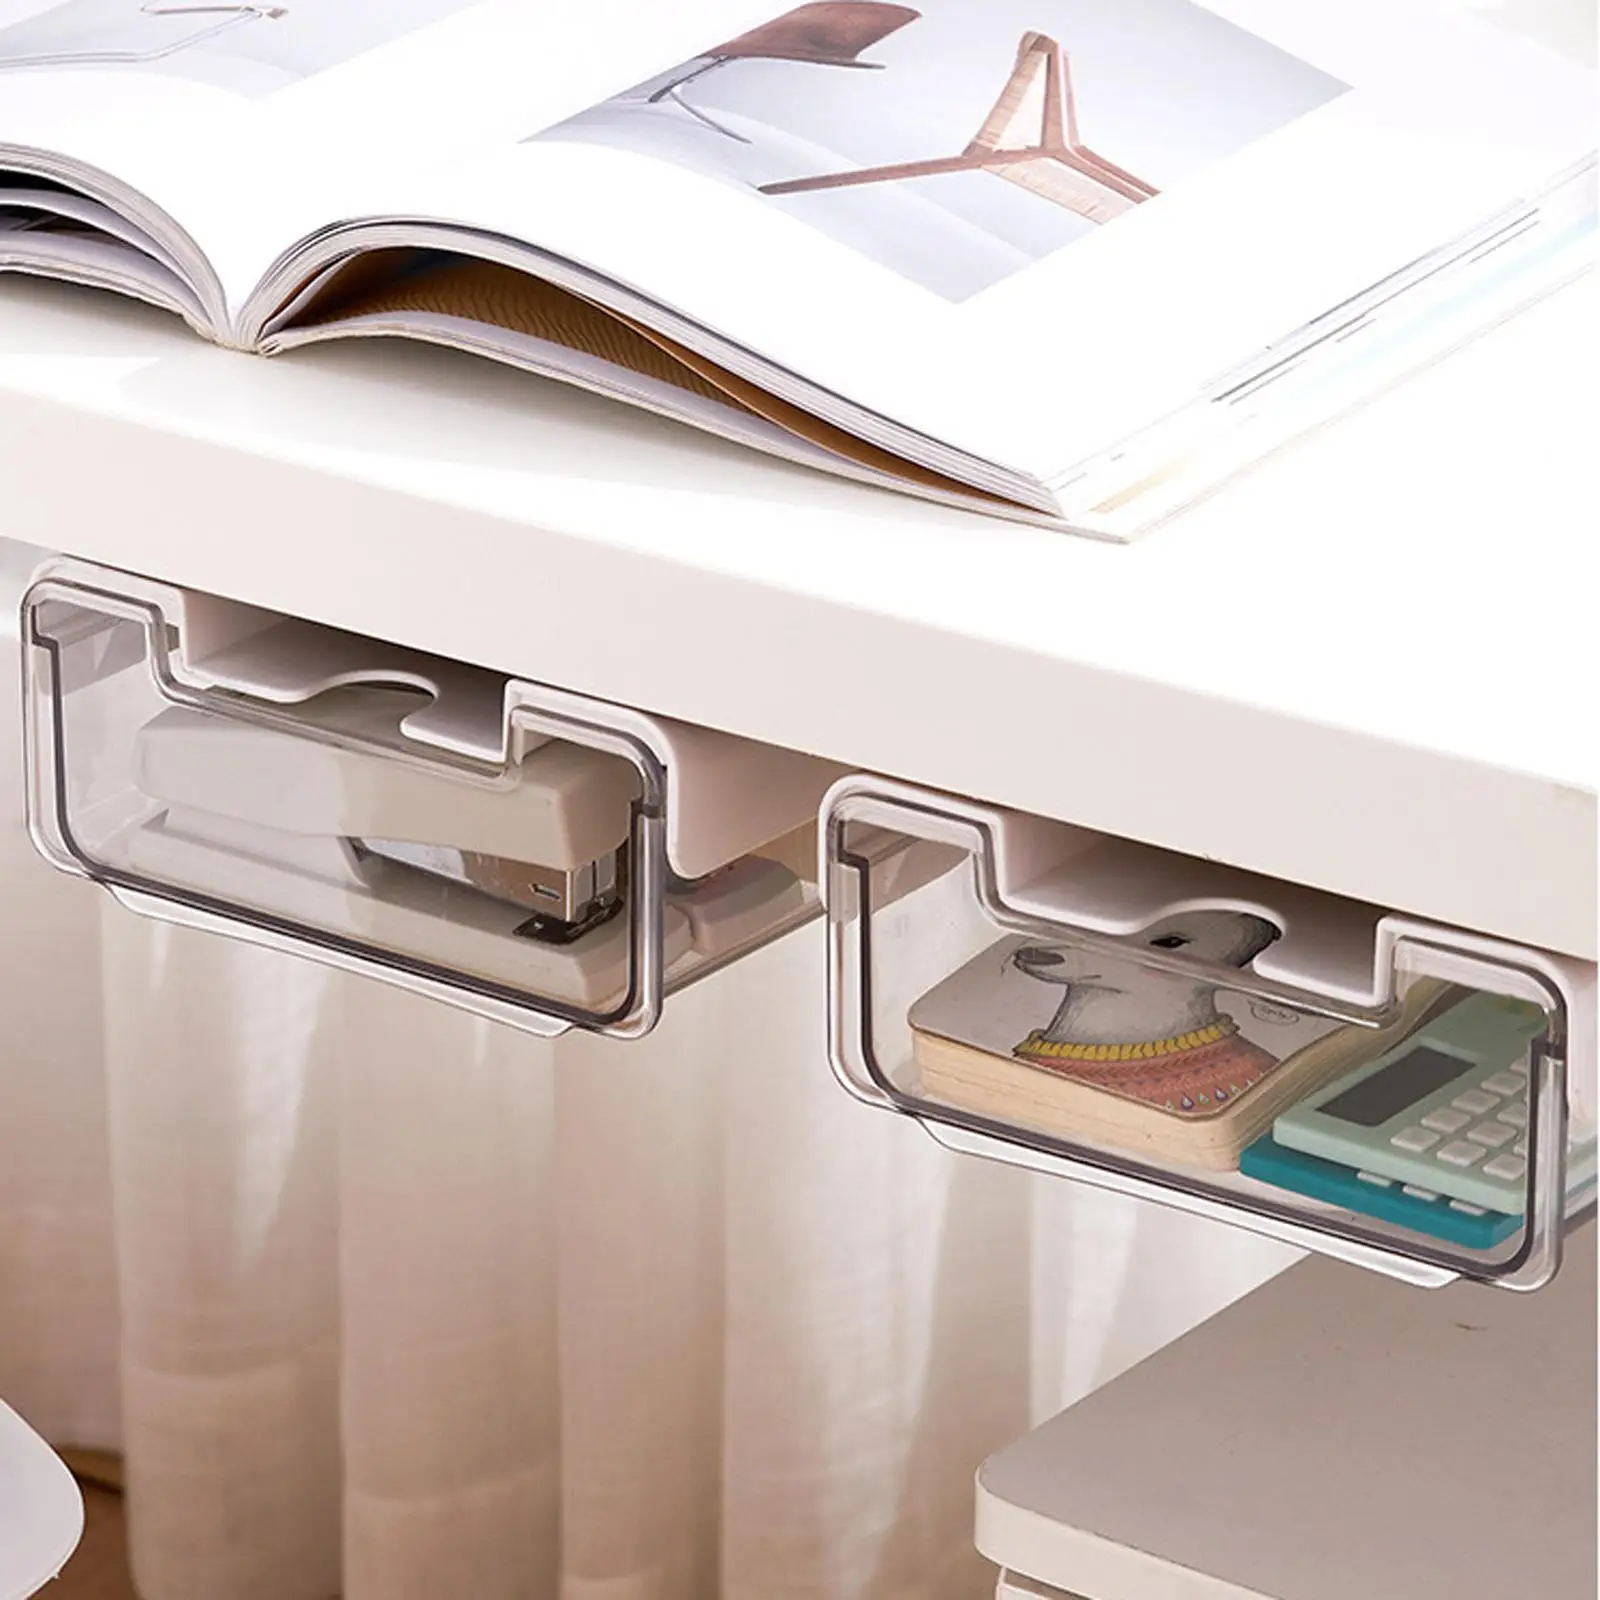 Under Desk Storage Drawers Small Expandable Drawer Tray for Storage Bathroom Home Office